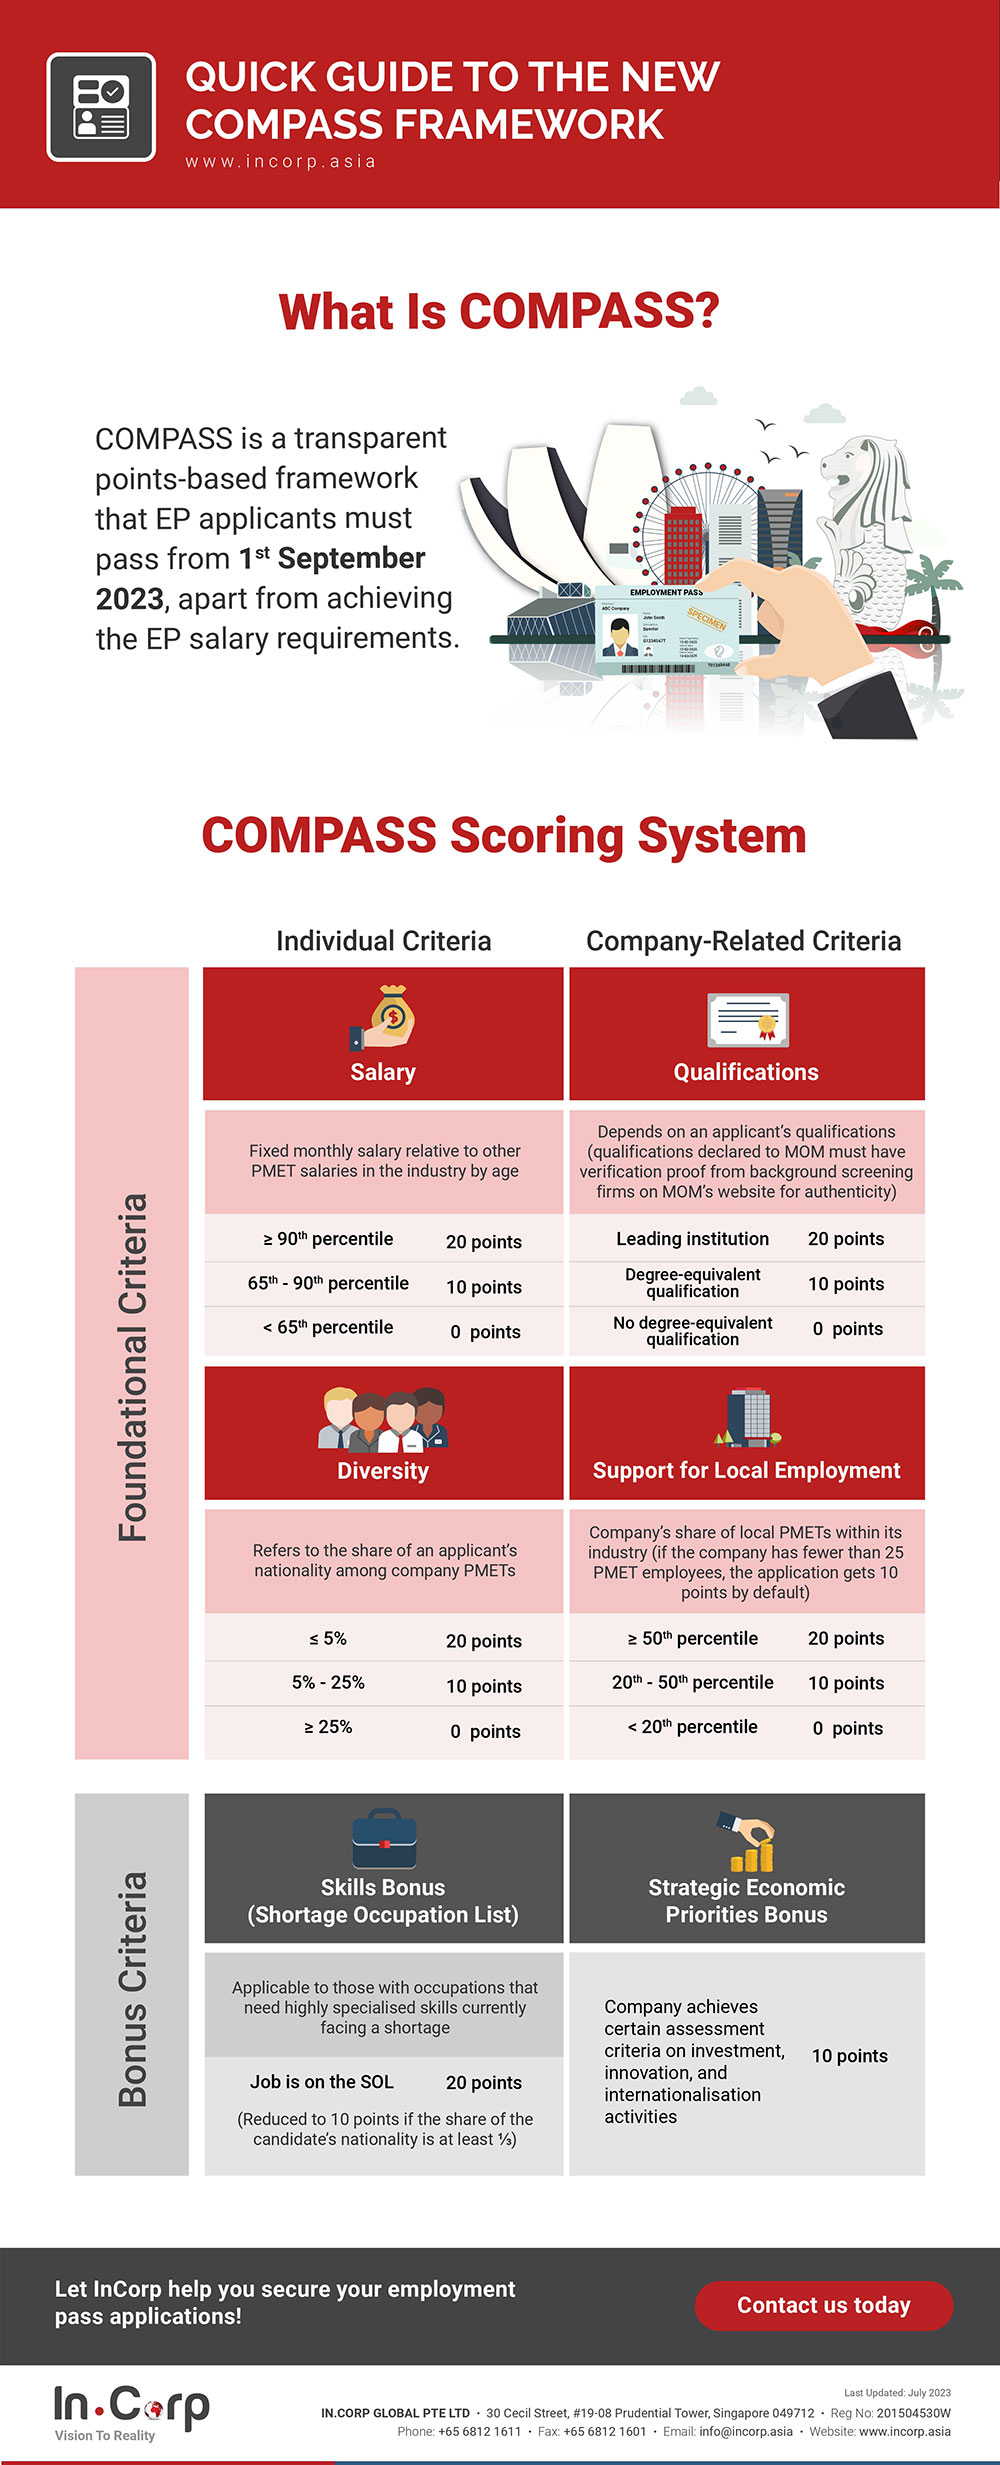 What is the New COMPASS Framework?